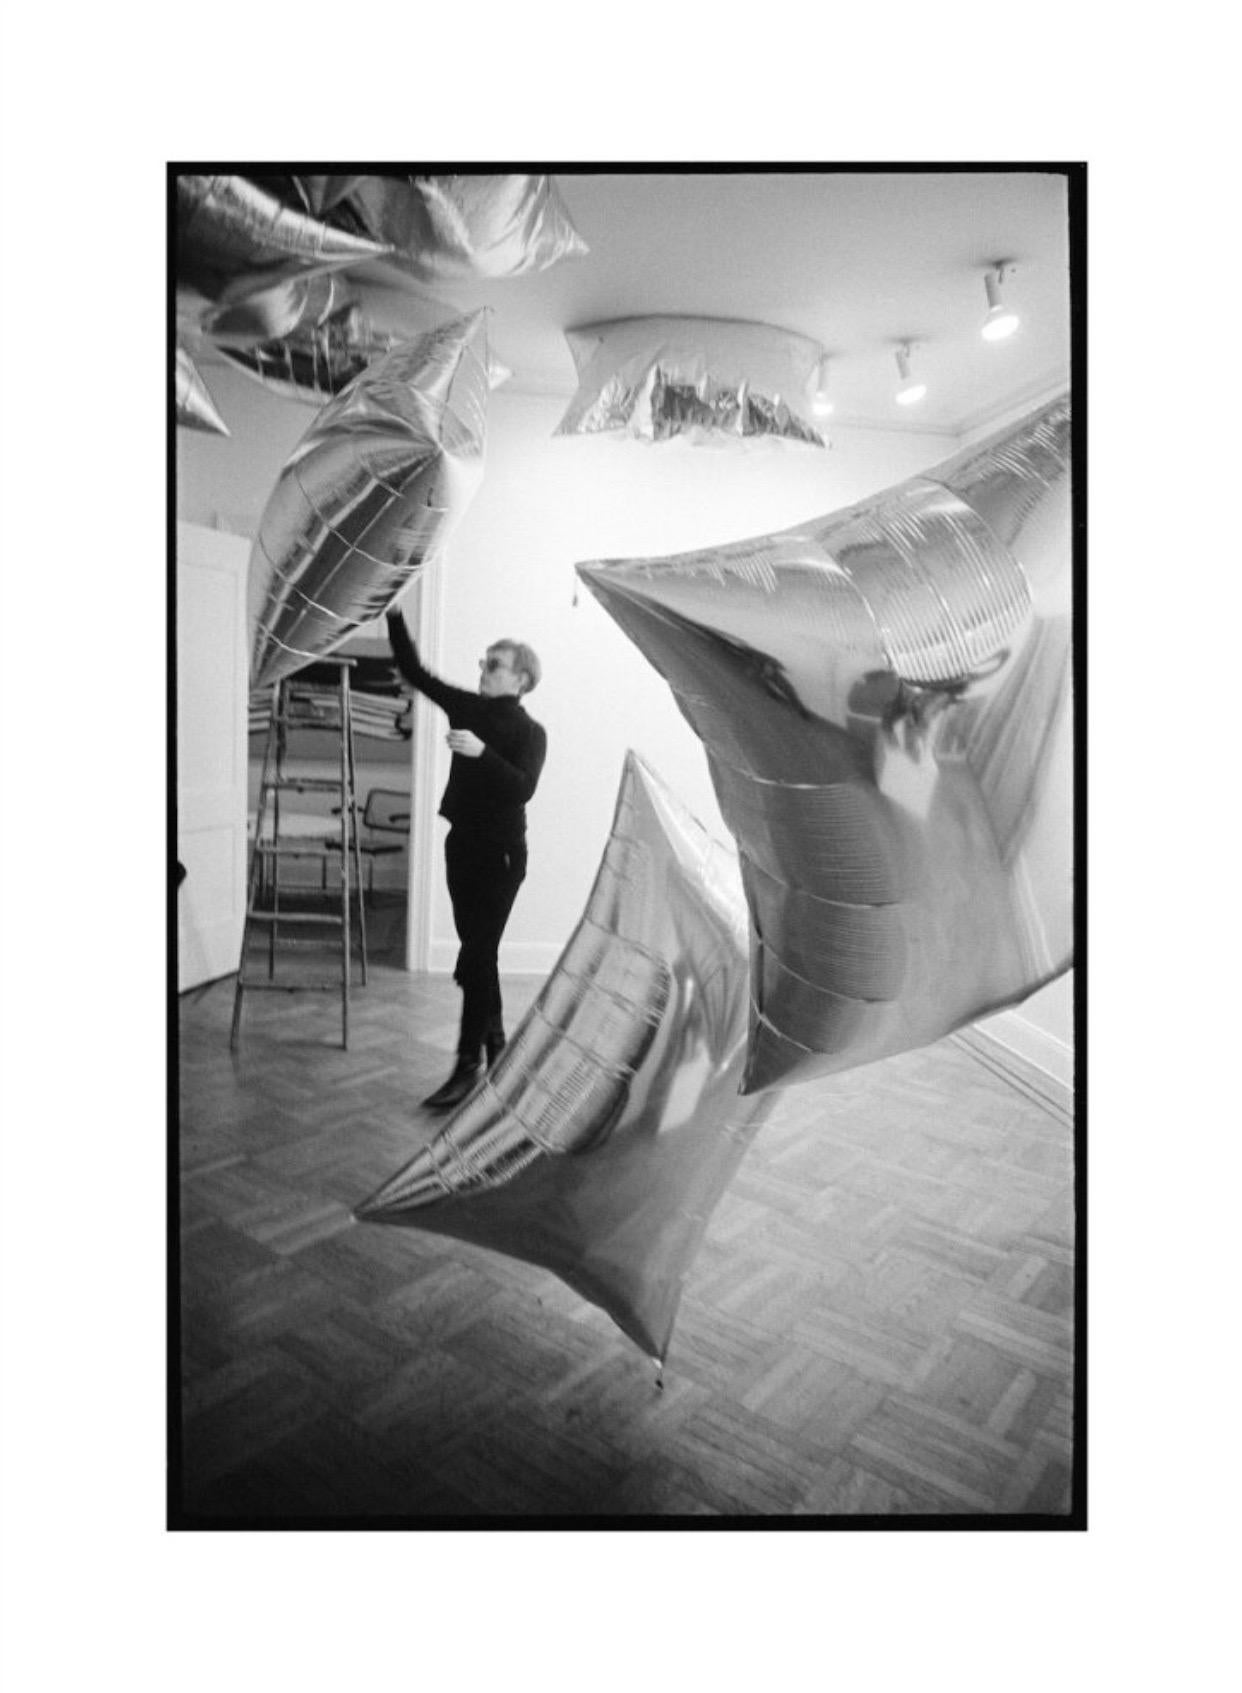 Nat Finkelstein, Silver Clouds Installation at Leo Castelli Gallery, NYC, 1966/2020

Andy Warhol prepares the first exhibition of his 'Silver Clouds' installation at the Leo Castelli Gallery, New York 1966

Image size: 40 x 60cm 
Paper size: 50 x